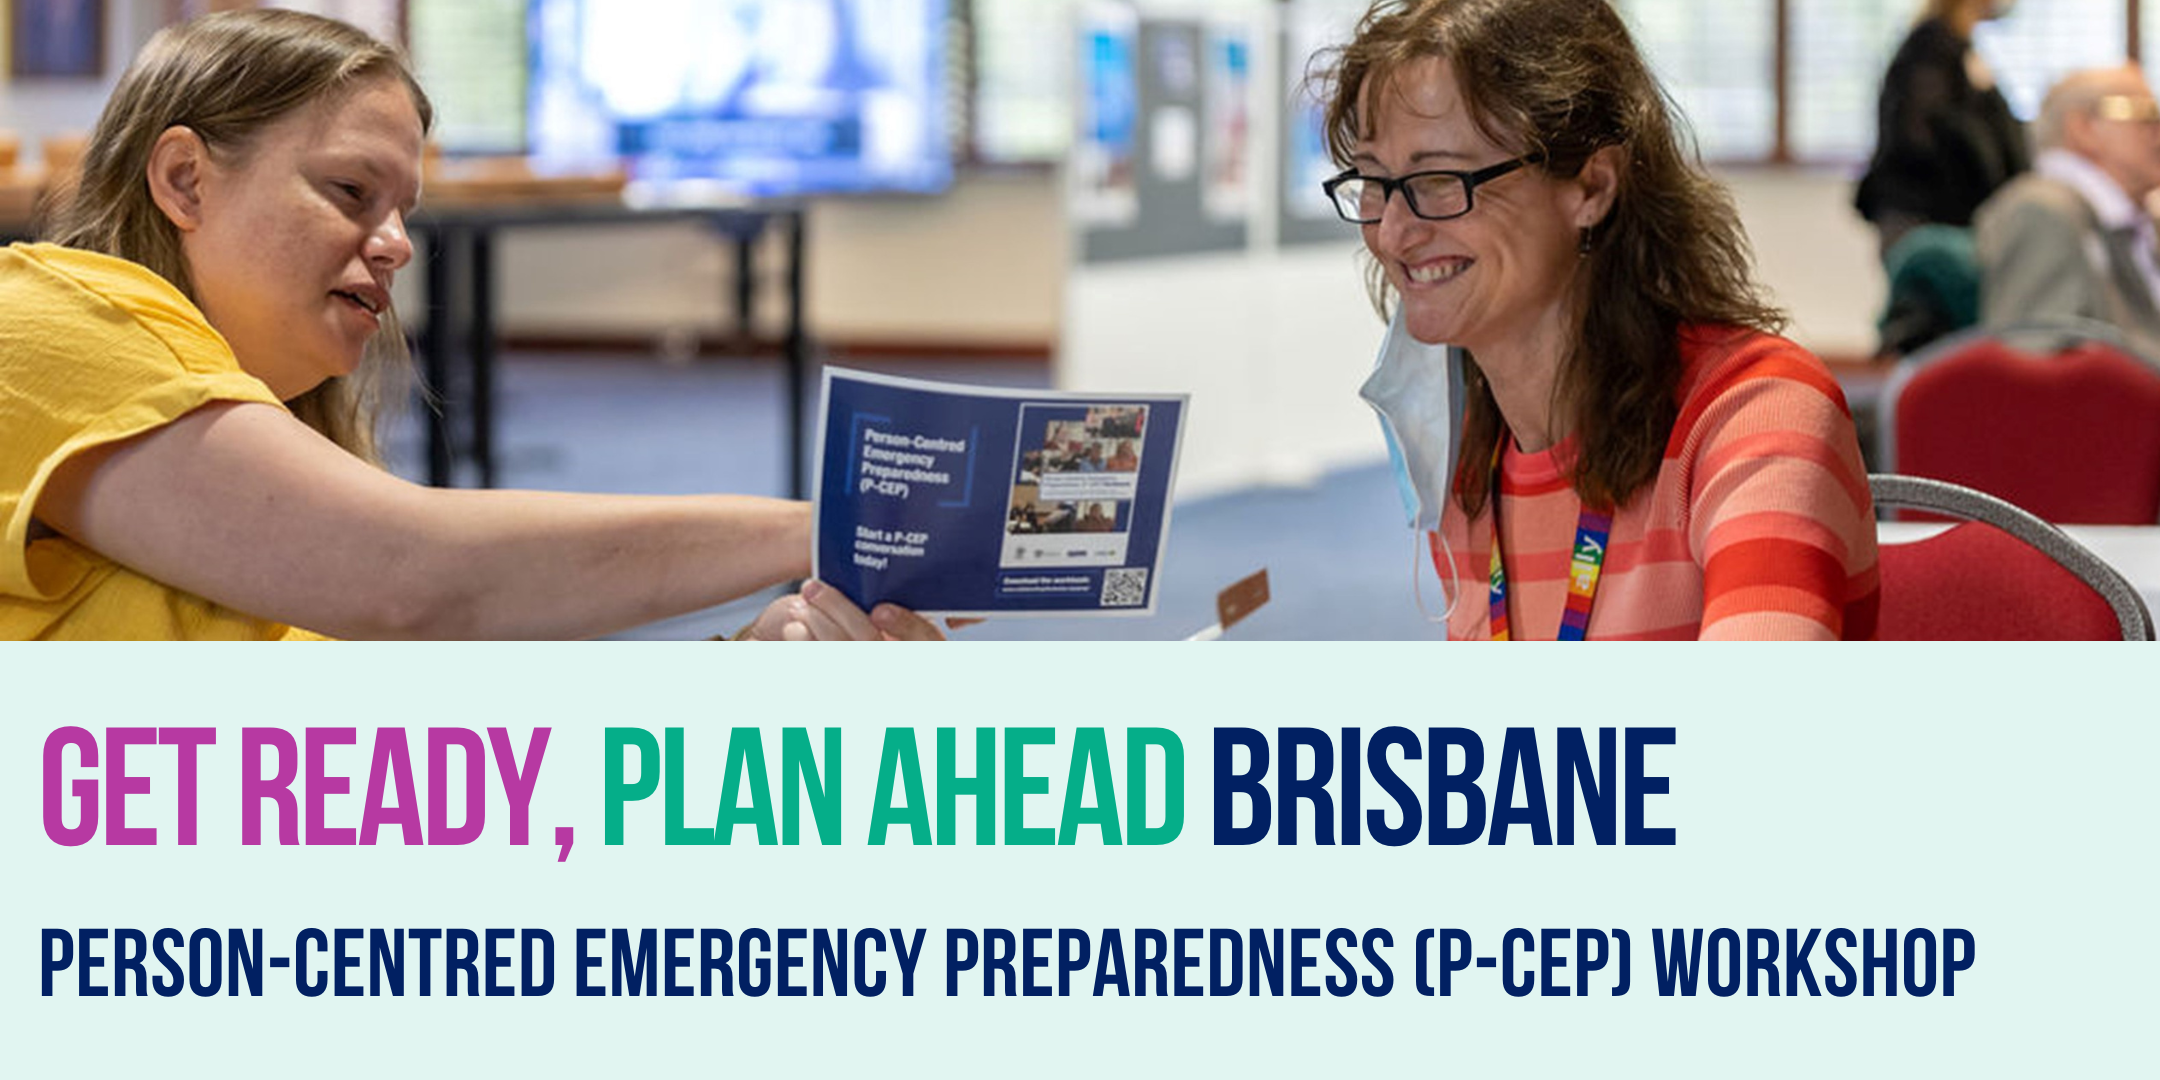 Get Ready and Plan Ahead Brisbane. Person-Centred Emergency Preparedness (P-CEP) Workshop. Cover page 